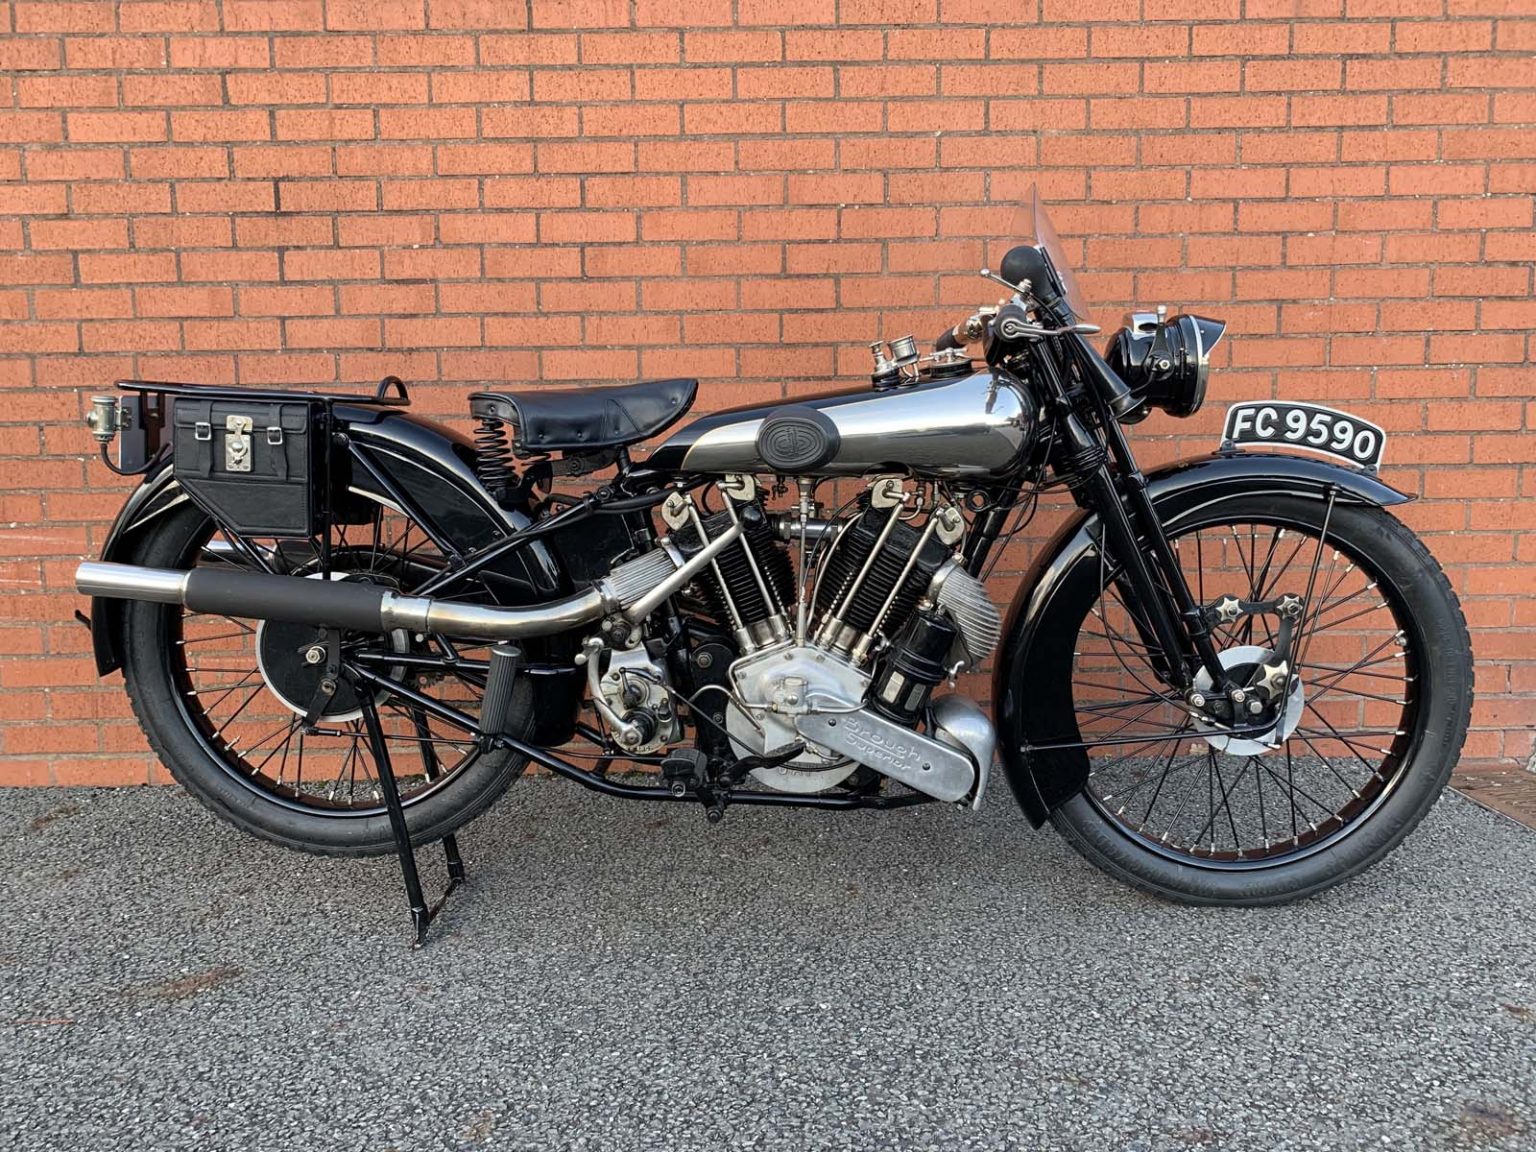 1925 Brough Superior SS100 Sells At Motorcycle Museum Auction For £184,000